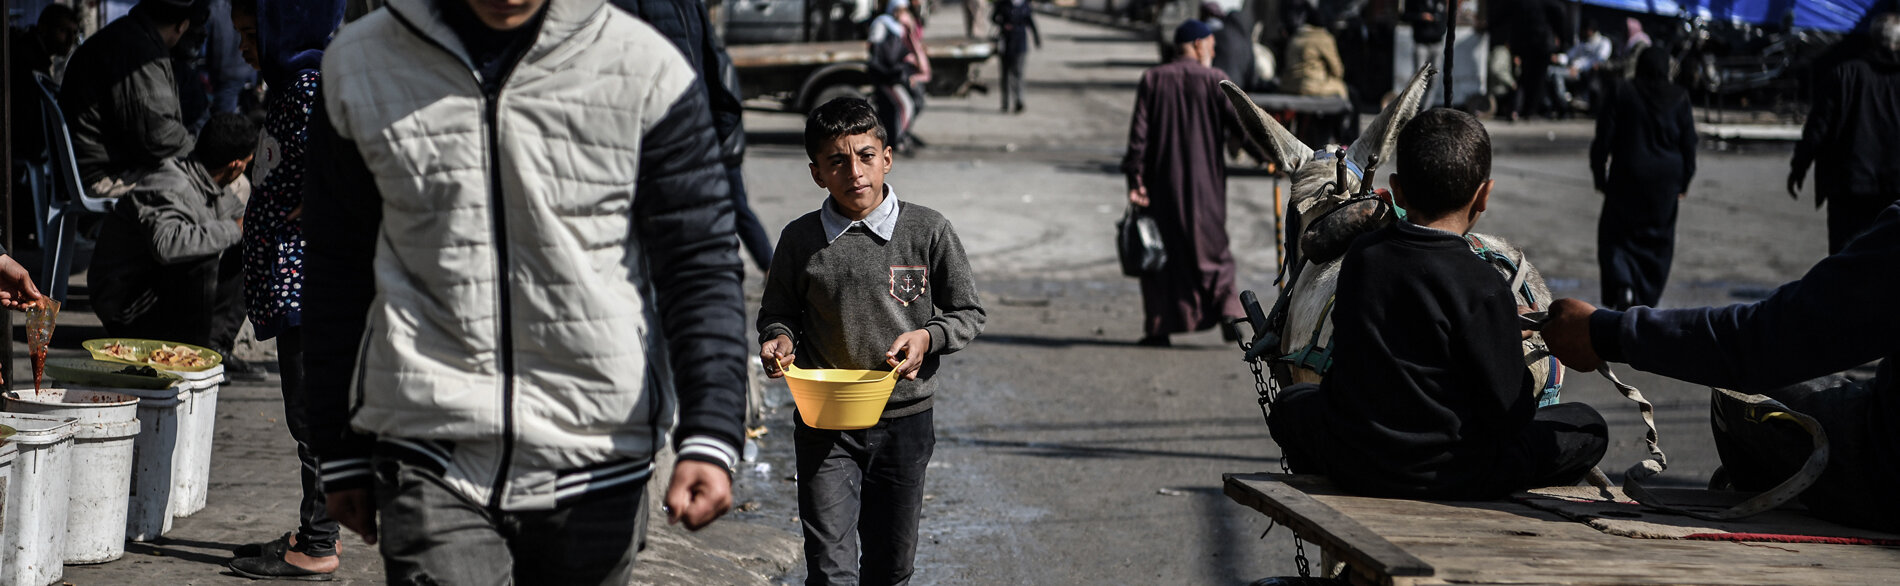 Muhammad (11) carrying a bowl of beans for his family who stay in a tent in Rafah. “Every day, I walk two kilometres and spend over five hours to provide one meal a day for my family,” he says. Photo by UNICEF/Zagout